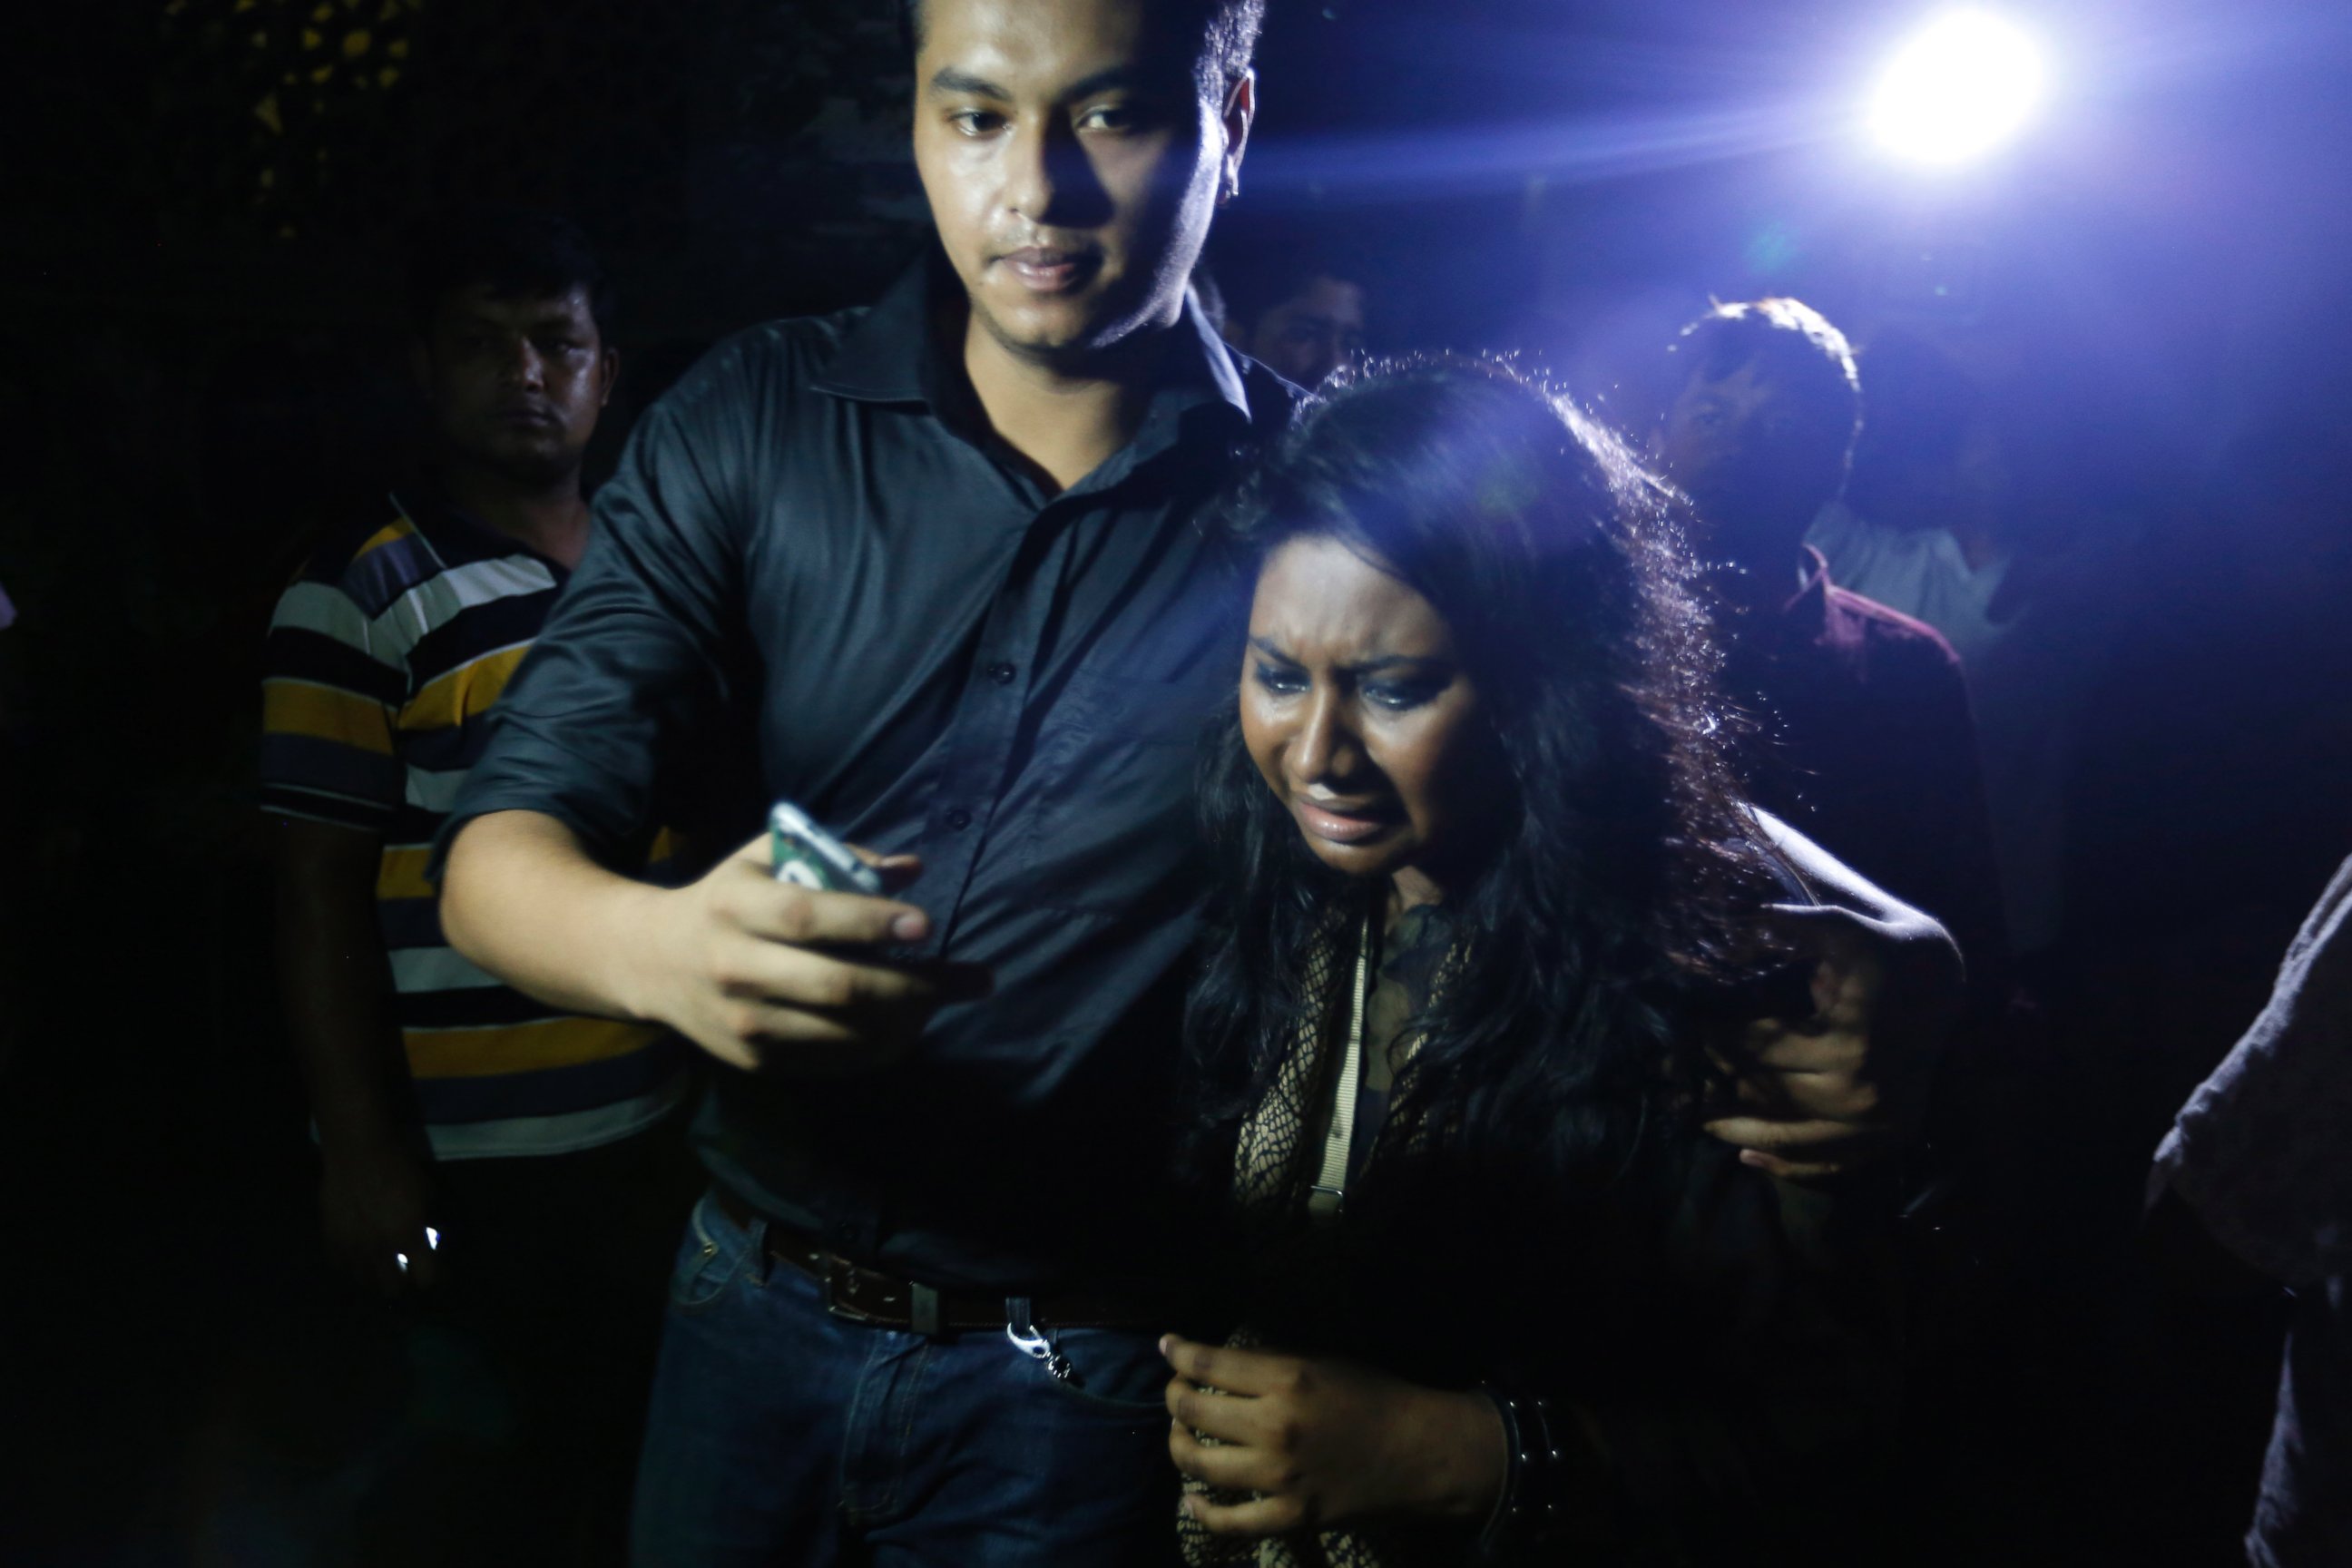 PHOTO: An unidentified coworker of U.S. Agency for International Development employee Xulhaz Mannan, who was stabbed to death, reacts as she returns from the crime scene in Dhaka, Bangladesh, April 25, 2016.